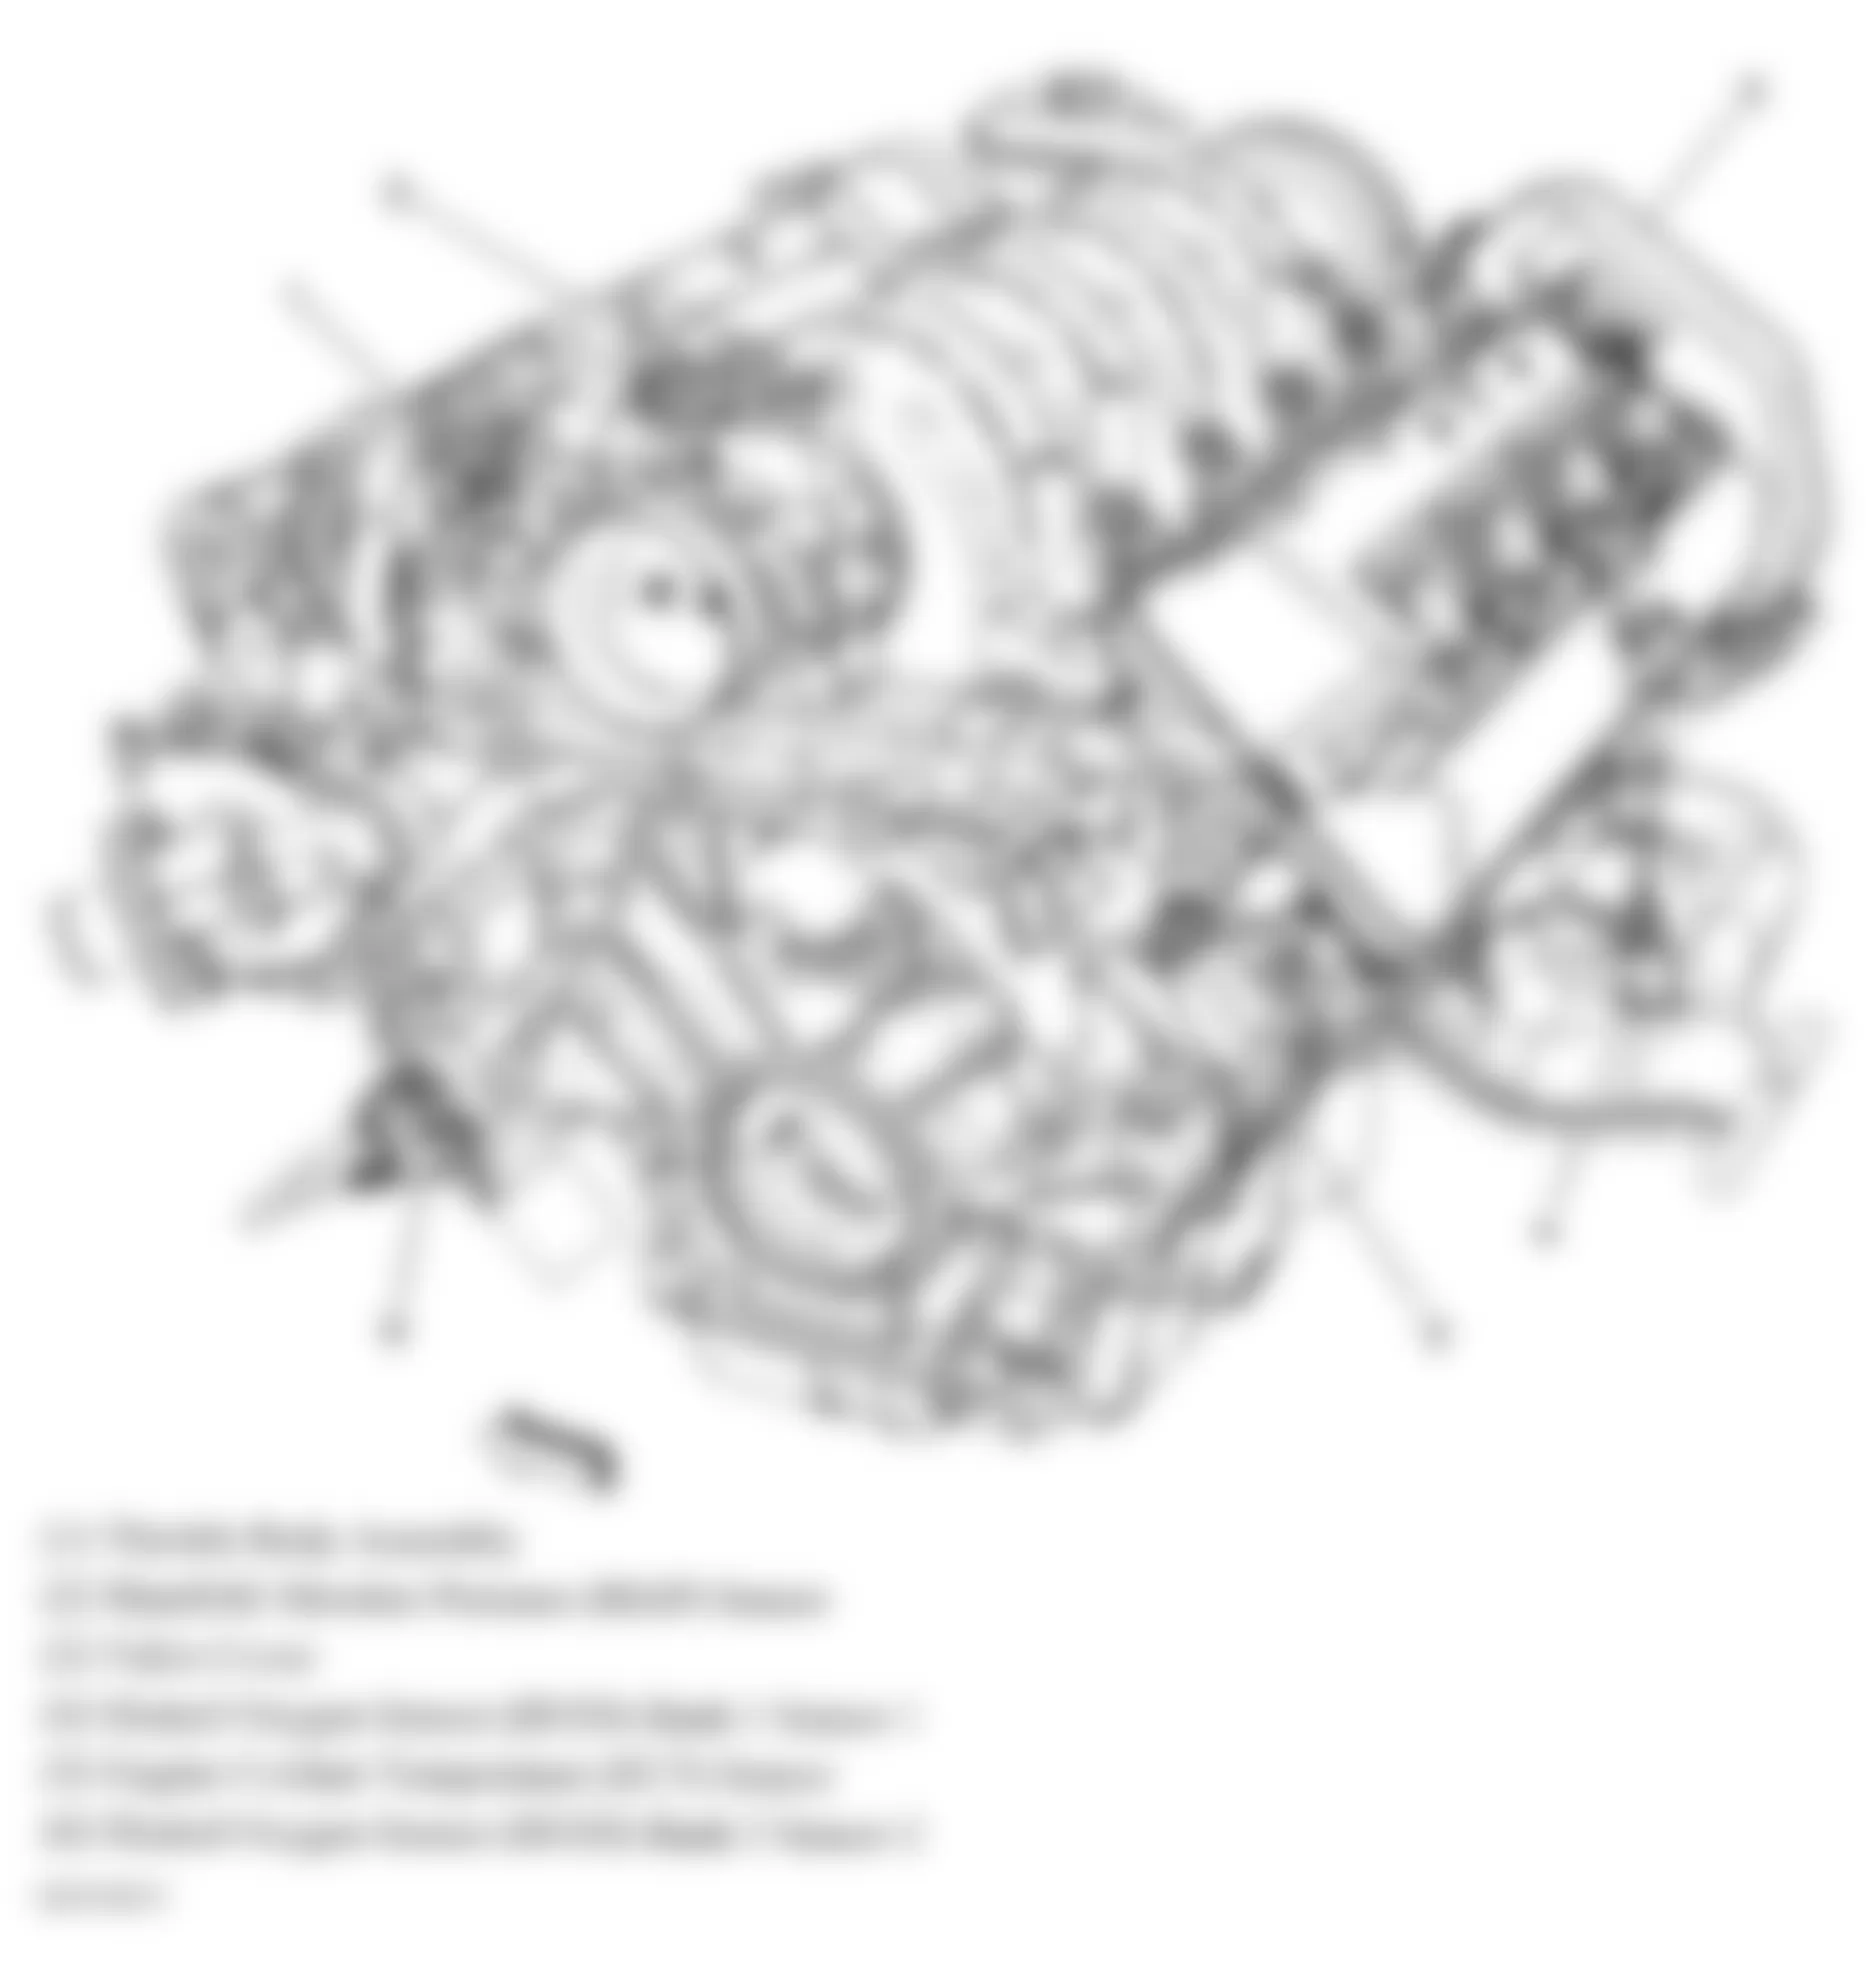 Buick Lucerne CXL 2010 - Component Locations -  Rear Of Engine (4.6L)